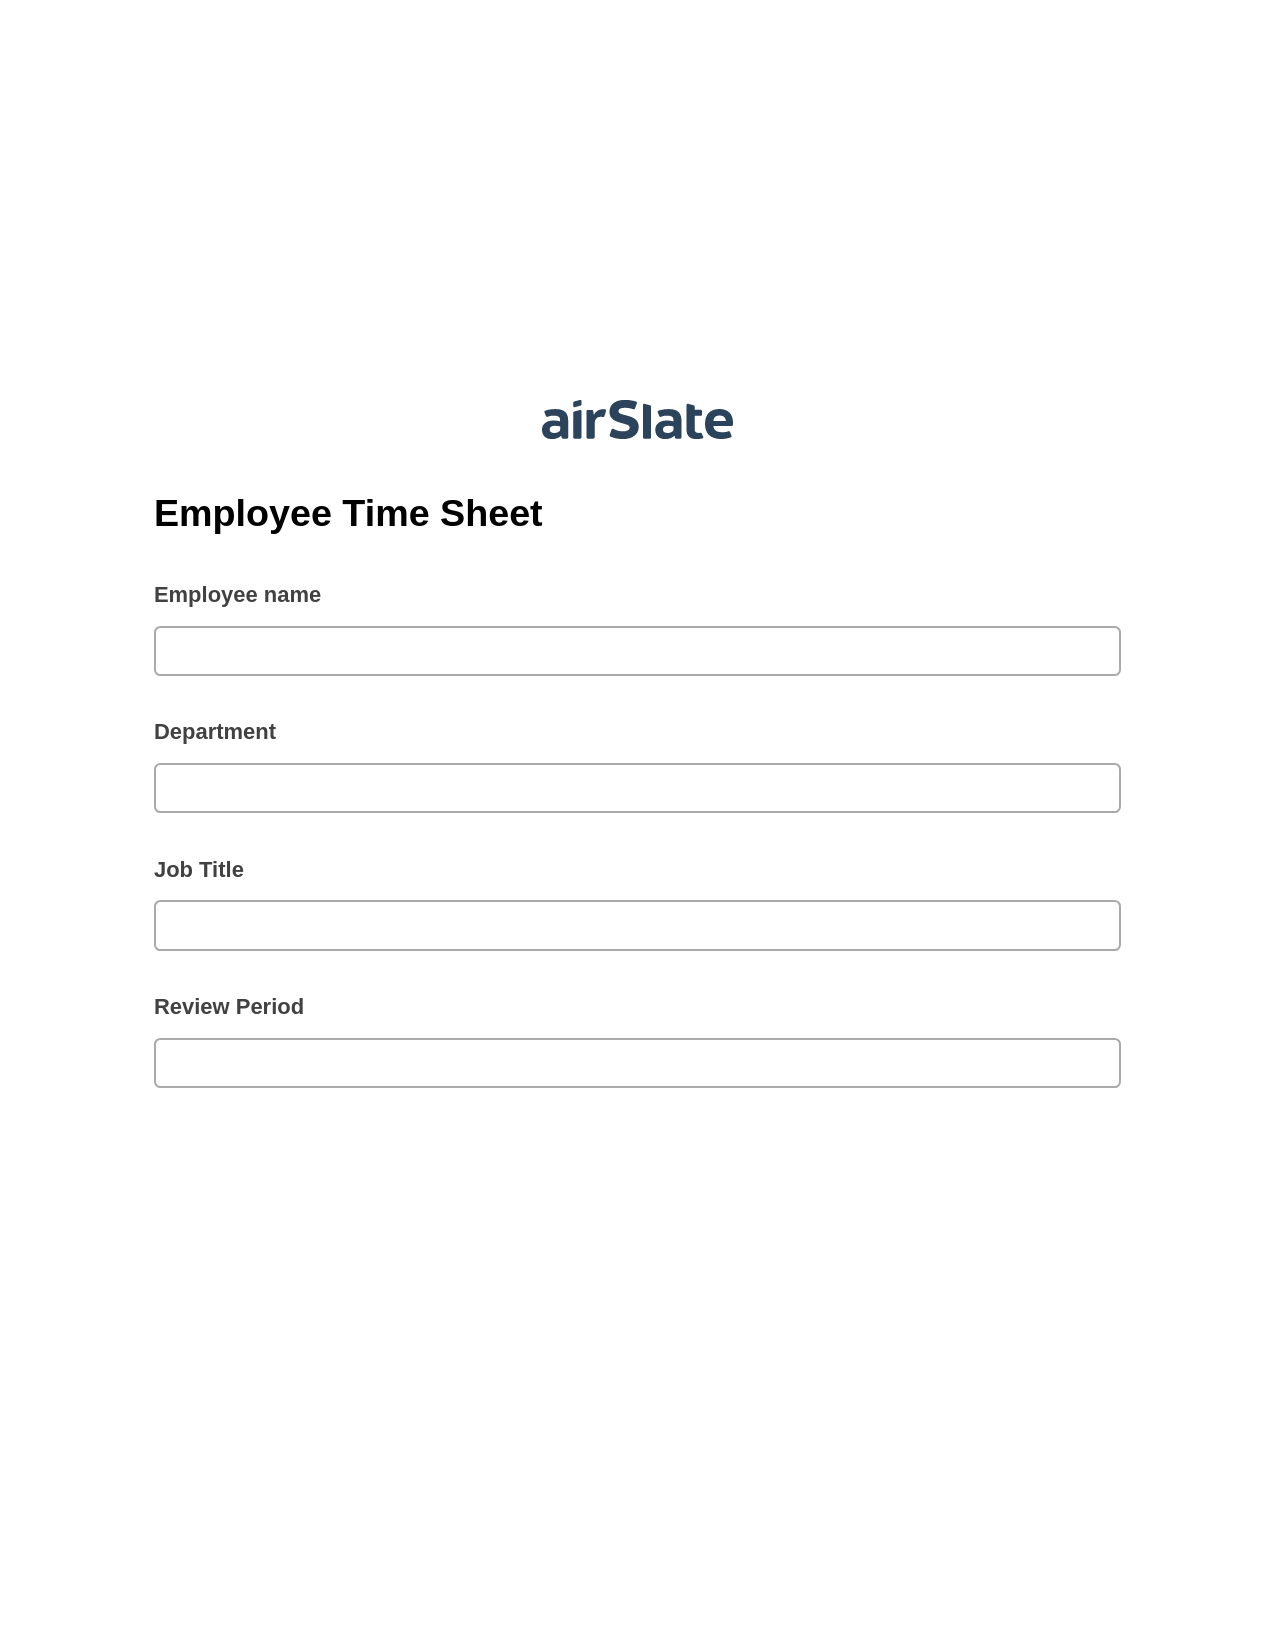 Multirole Employee Time Sheet Pre-fill from Google Sheets Bot, Create slate addon, Export to Excel 365 Bot